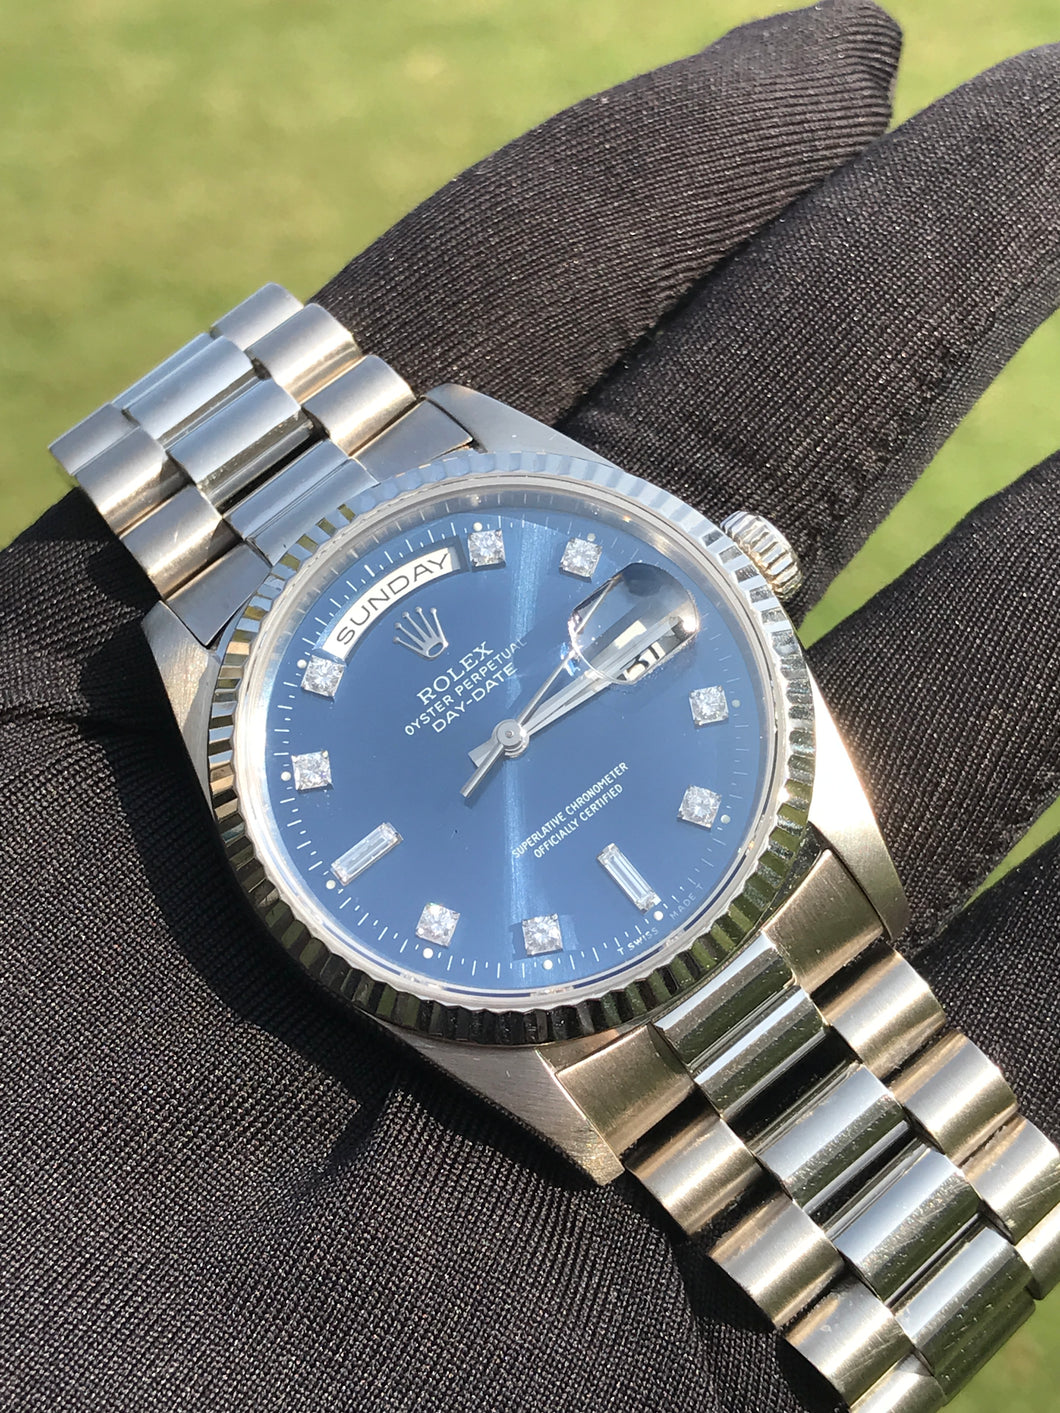 1990 Rolex Day Date 18k White Gold with Diamonds